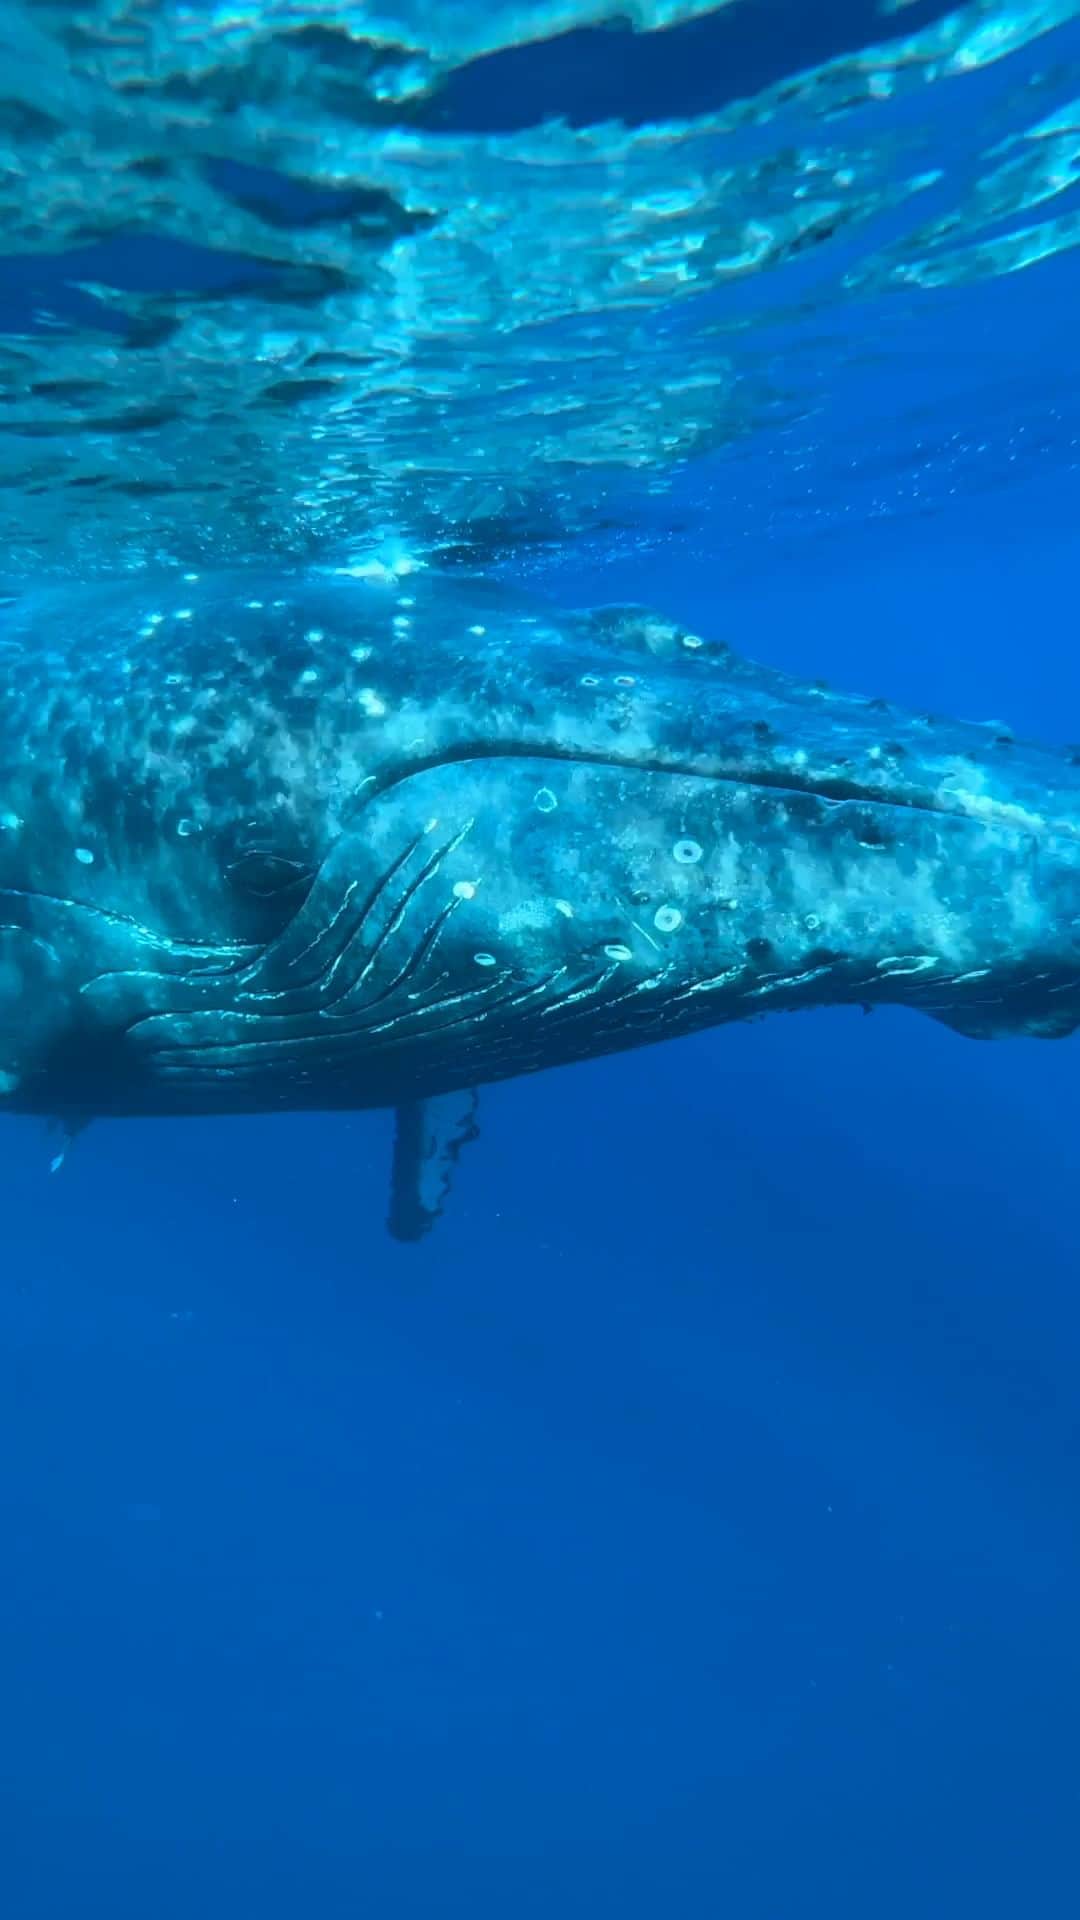 Discoveryのインスタグラム：「🎥 + 💭 by @nadia.aly.photo  An extraordinary privilege to witness the grace of humpback whales in their ocean home. A week ago, an unforgettable moment unfolded in Tonga during one of my Humpback Swims Expeditions. This humpback companion, after a playful rendezvous, peacefully drifted into slumber in our presence. The trust and connection shared were profound, allowing this gentle giant to rest peacefully as we swam beside her. Grateful for these precious encounters that remind us of the wonders of nature. 🐋💙 DM me if you want to join in 2024!  #HumpbackMagic #OceanConnection #WhaleWisdom #MarineMonday」